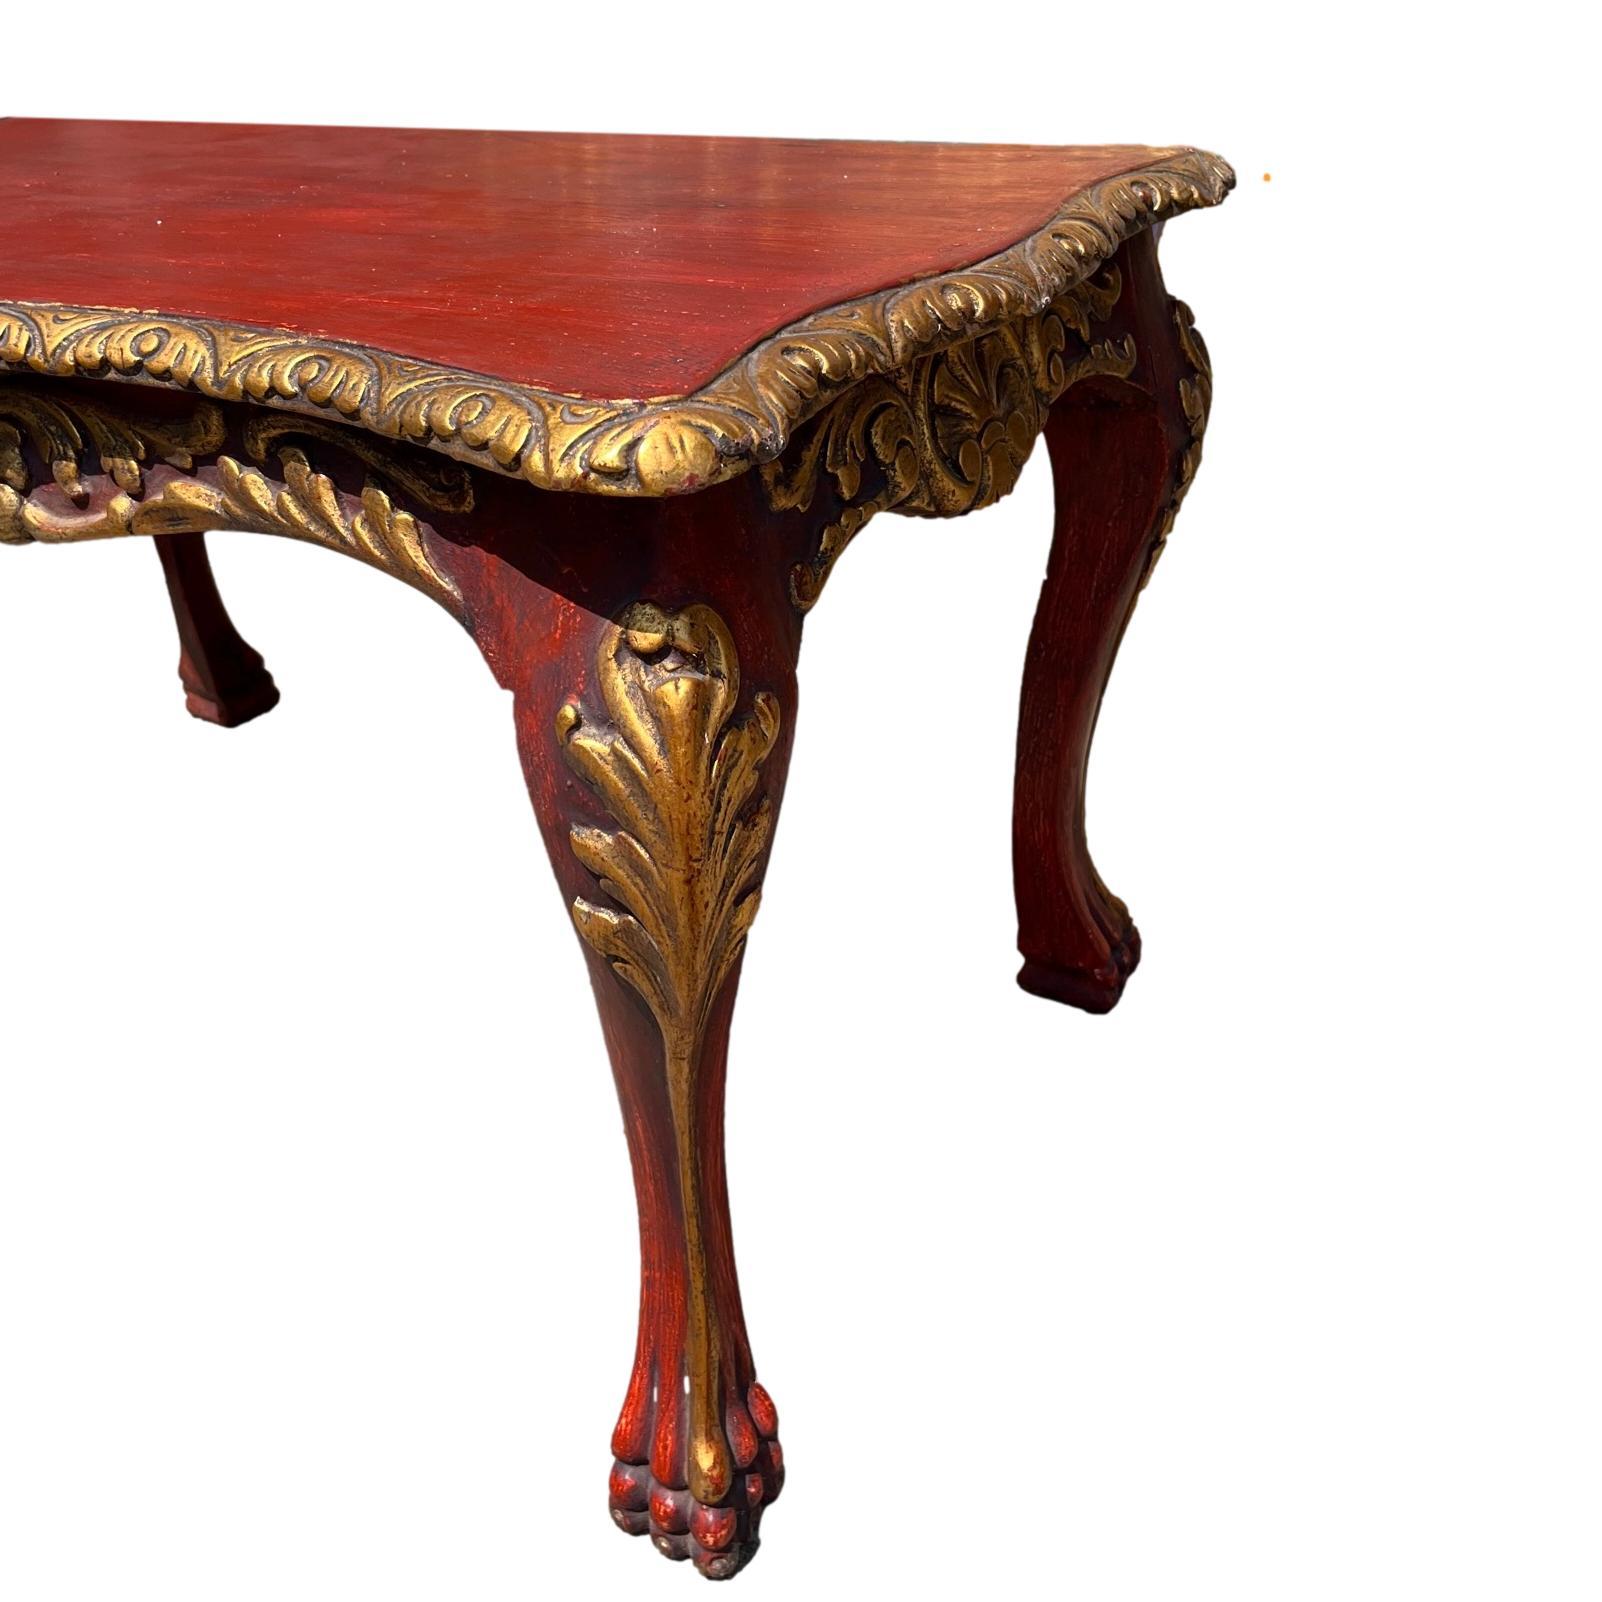 A circa 1920's painted and gilt Venetian table.

Measurements:
Length: 31.5